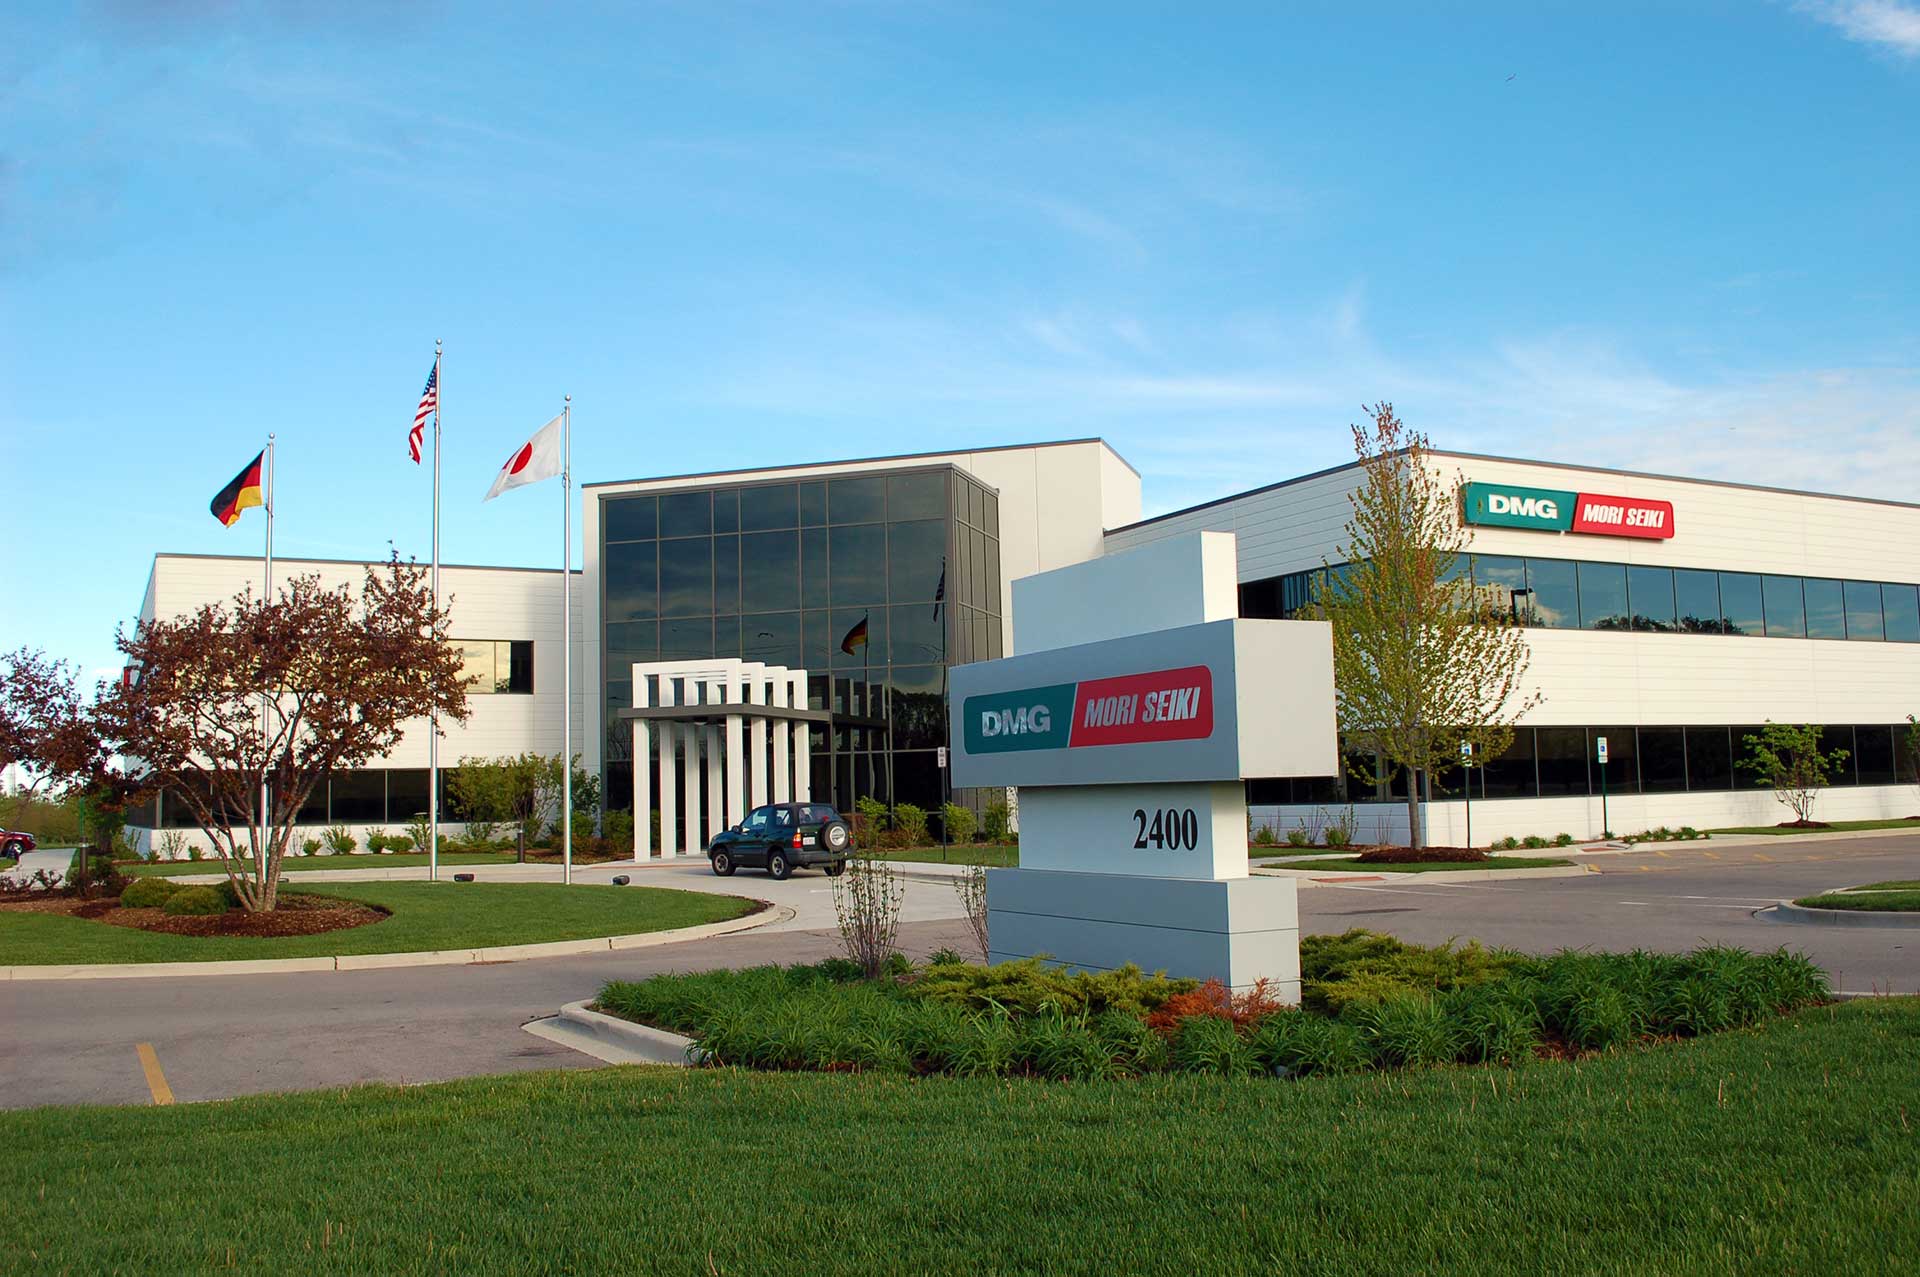 DMG Mori headquarters and showroom at the Huntington 90 business park in Hoffman Estates, Illinois